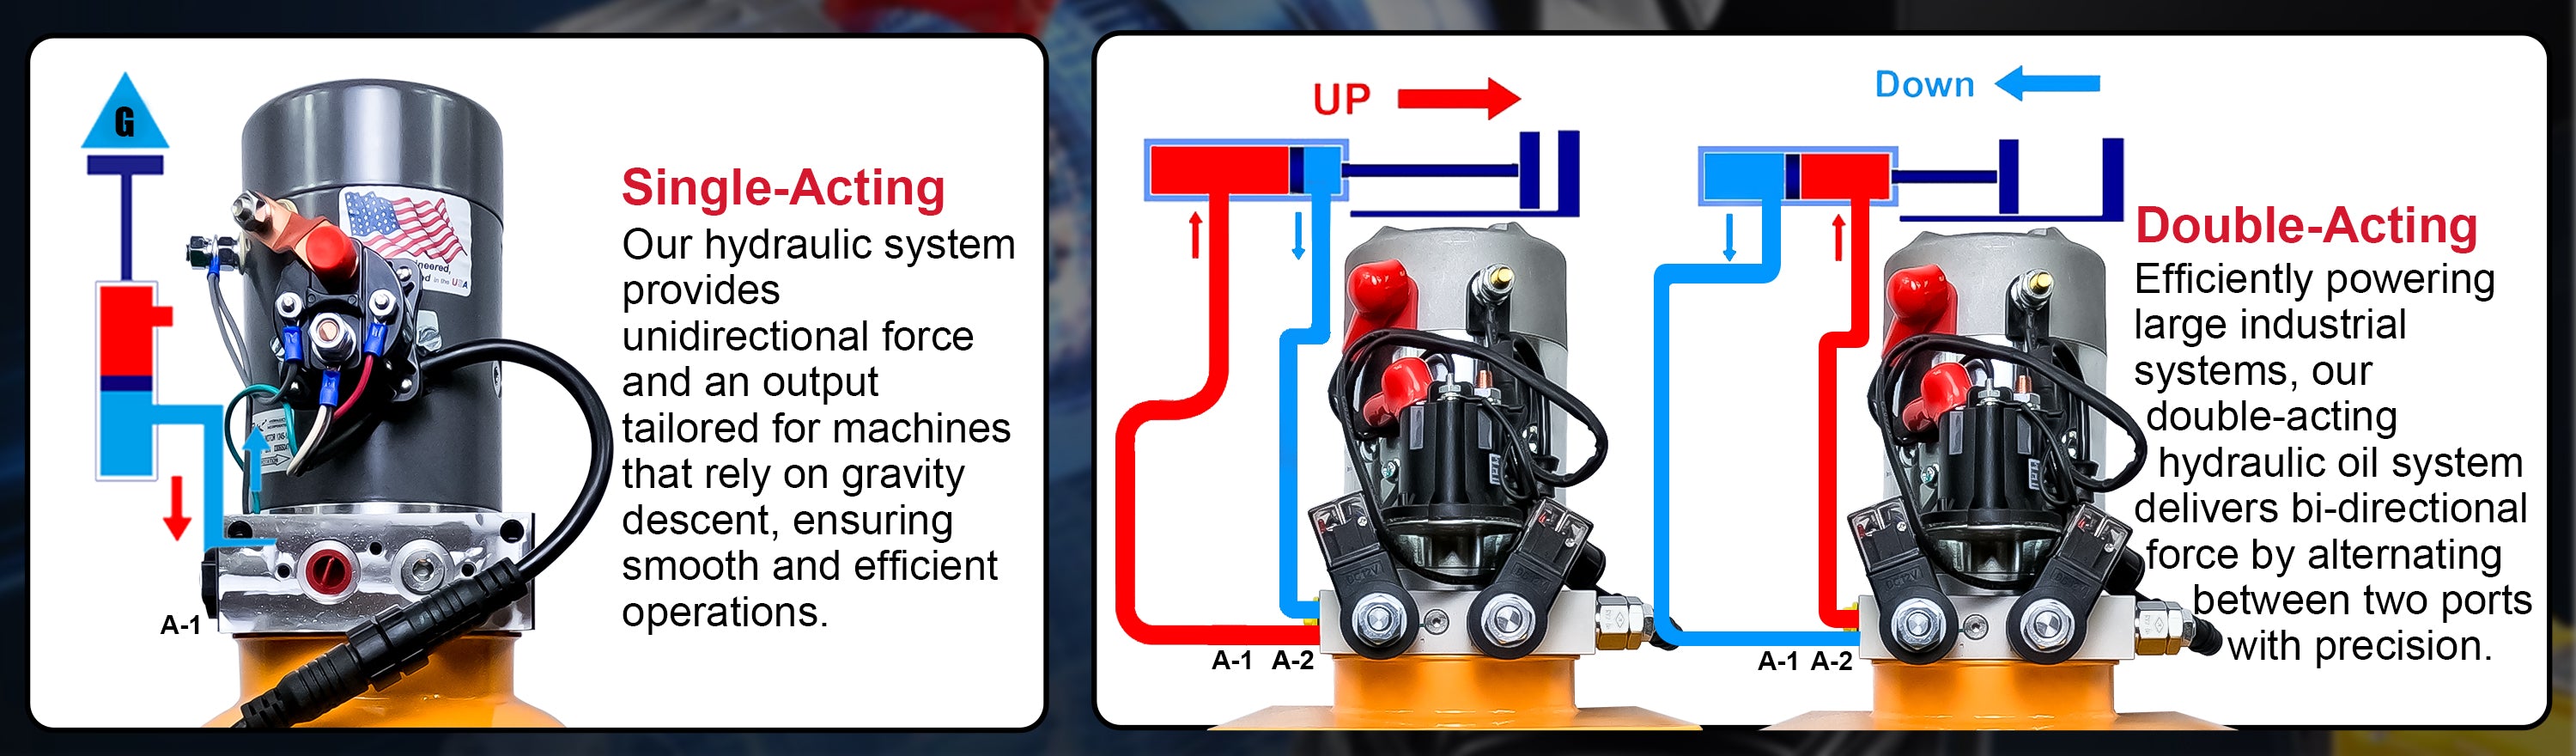 KTI 12V Single-Acting Hydraulic Pump - Steel Reservoir, shown in a detailed diagram highlighting its compact, efficient design and key components for hydraulic dump bed systems.